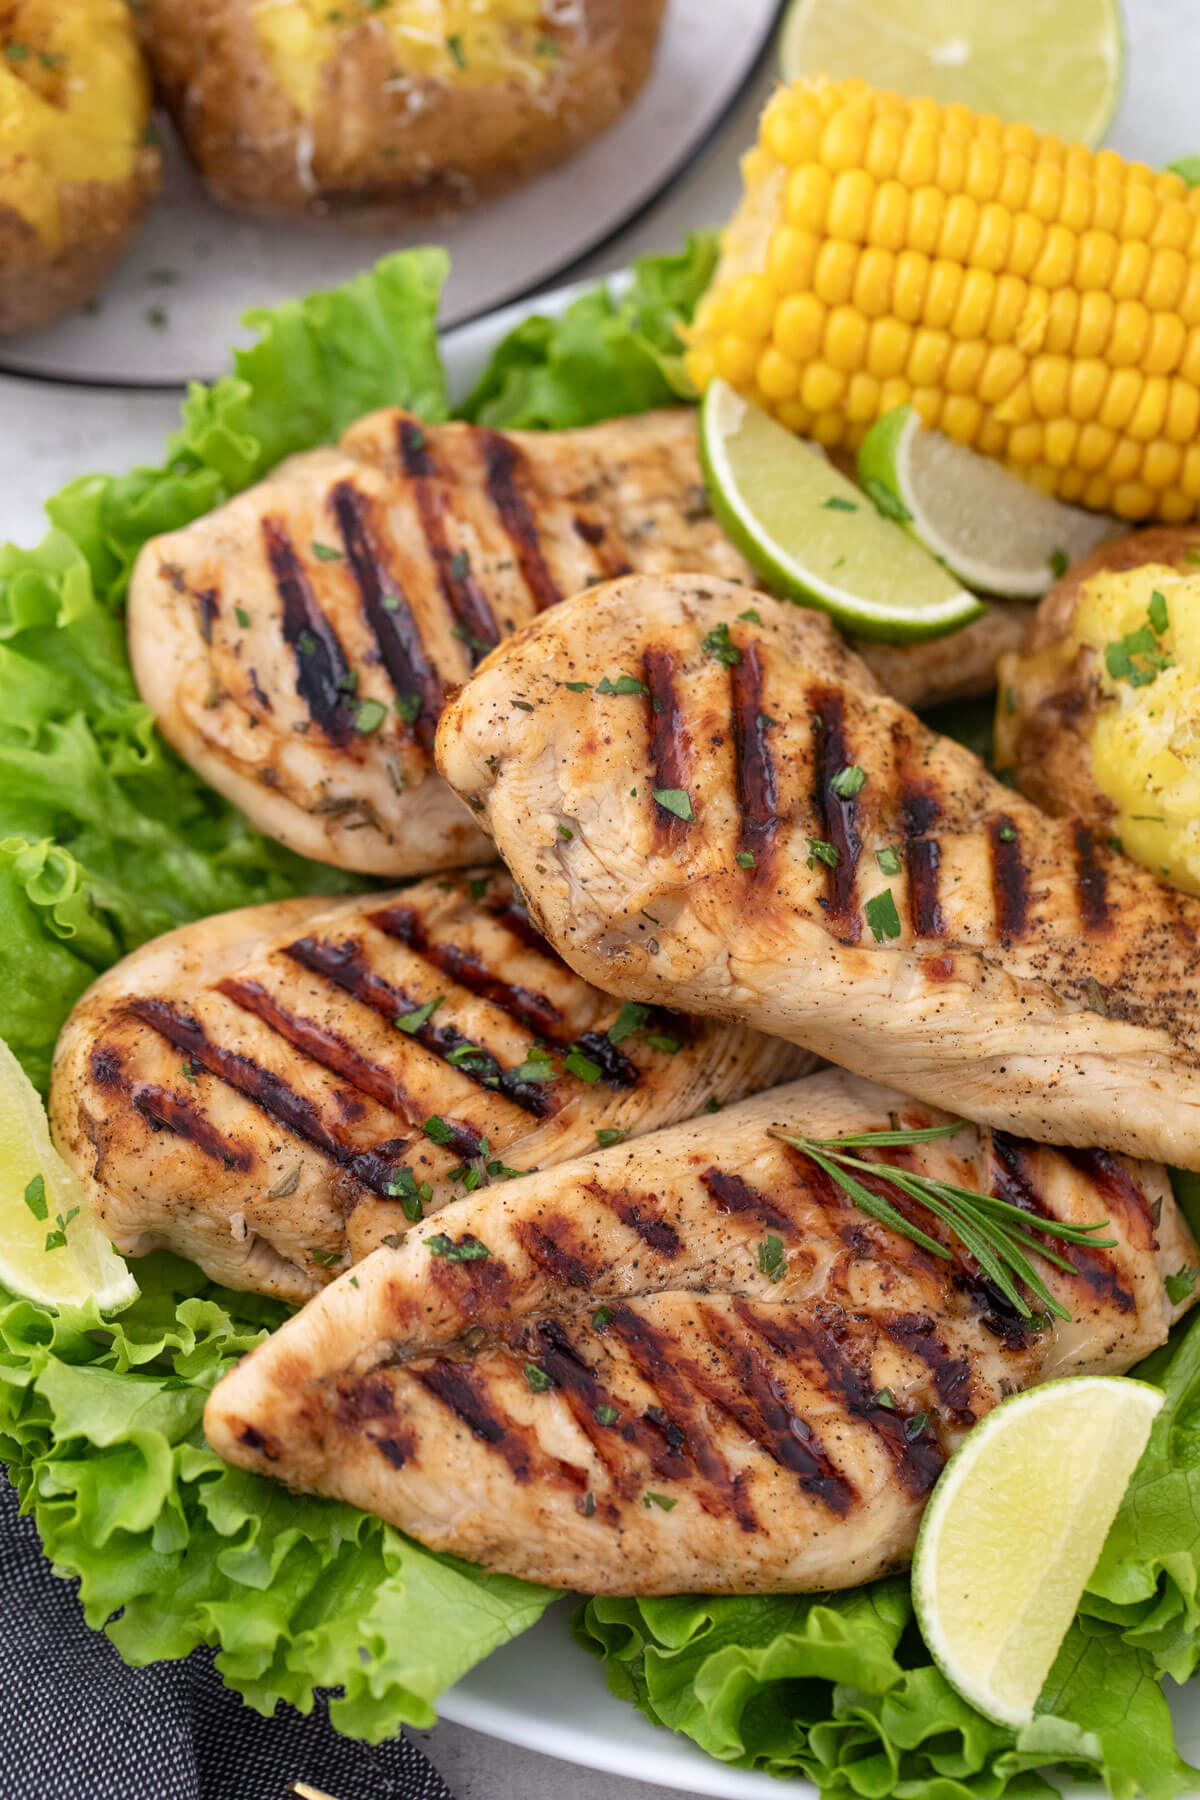 grilled guinness chicken breasts on a bed of fresh lettuce leaves on a plate with slices of lime and corn on the cob.